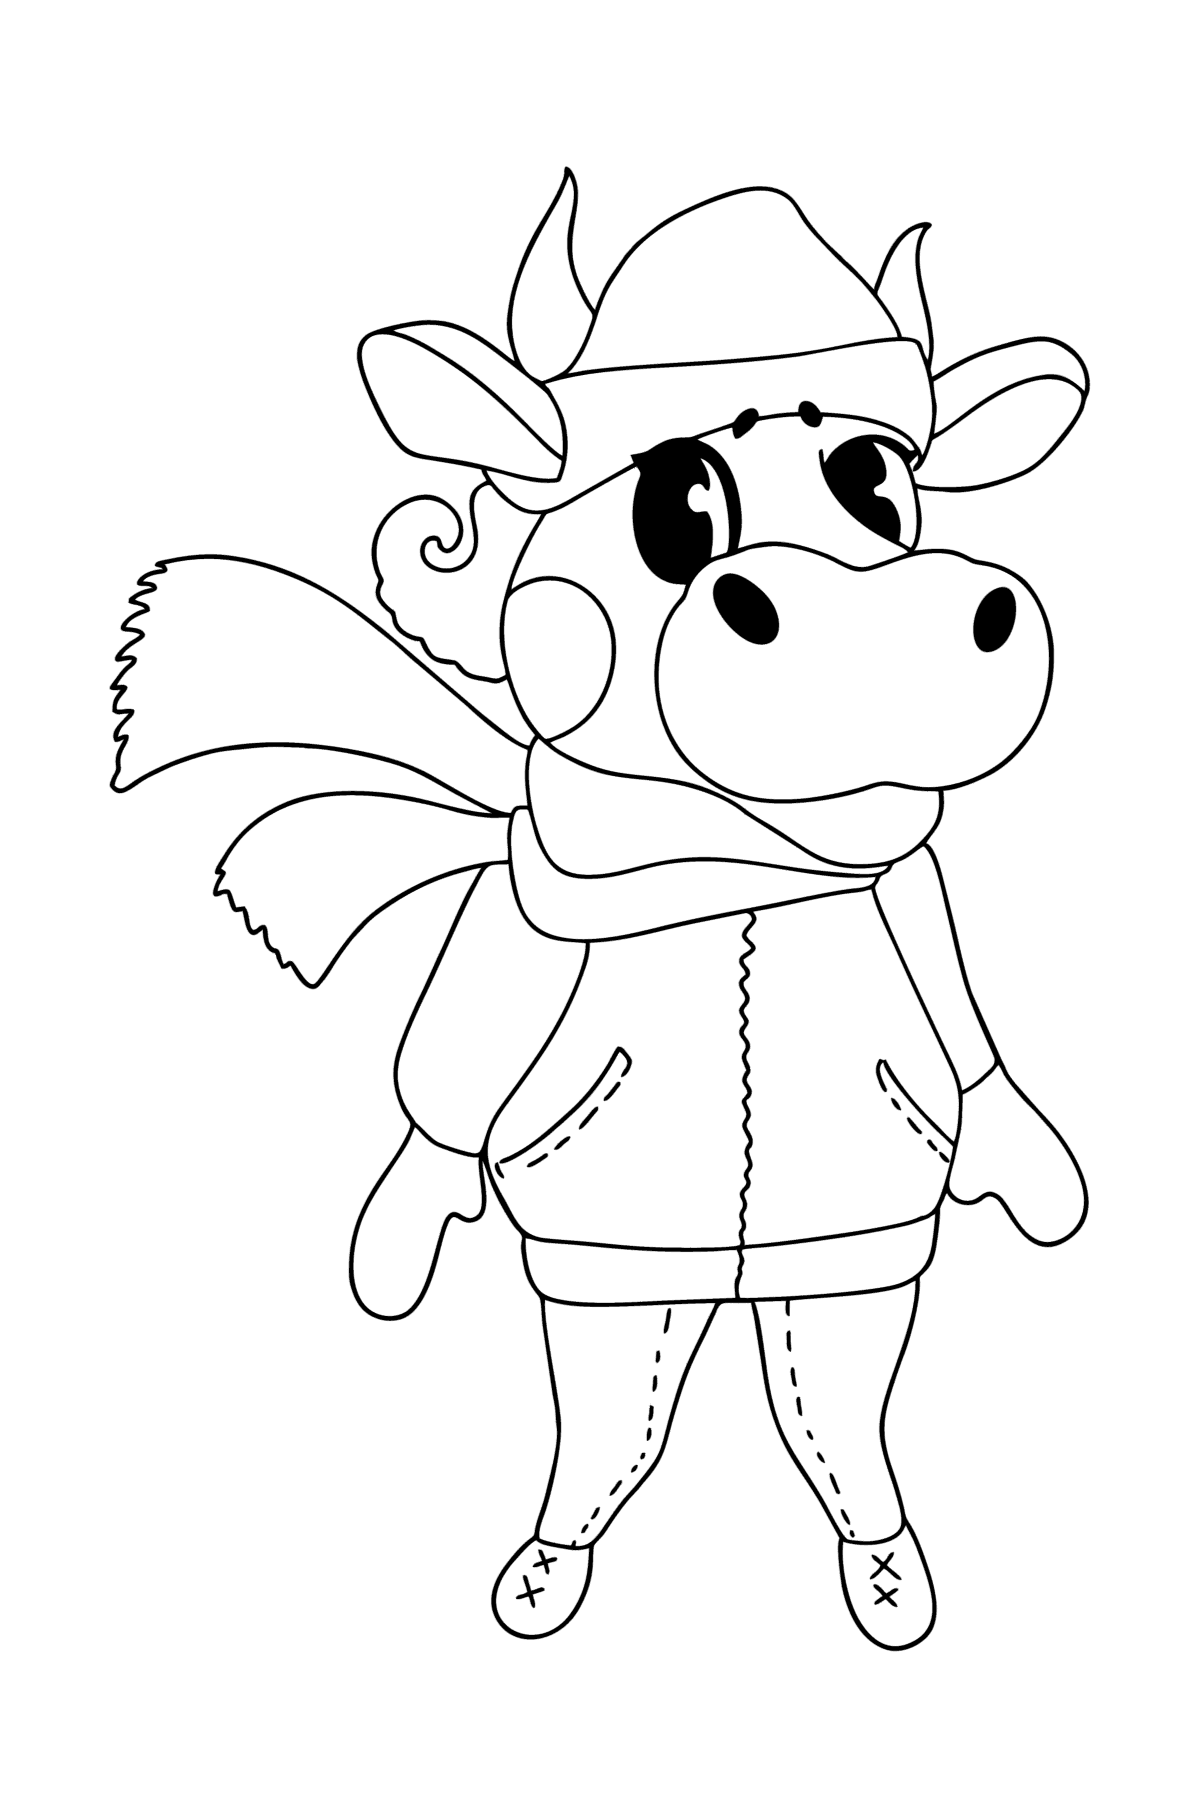 Kawaii cow coloring page - Coloring Pages for Kids